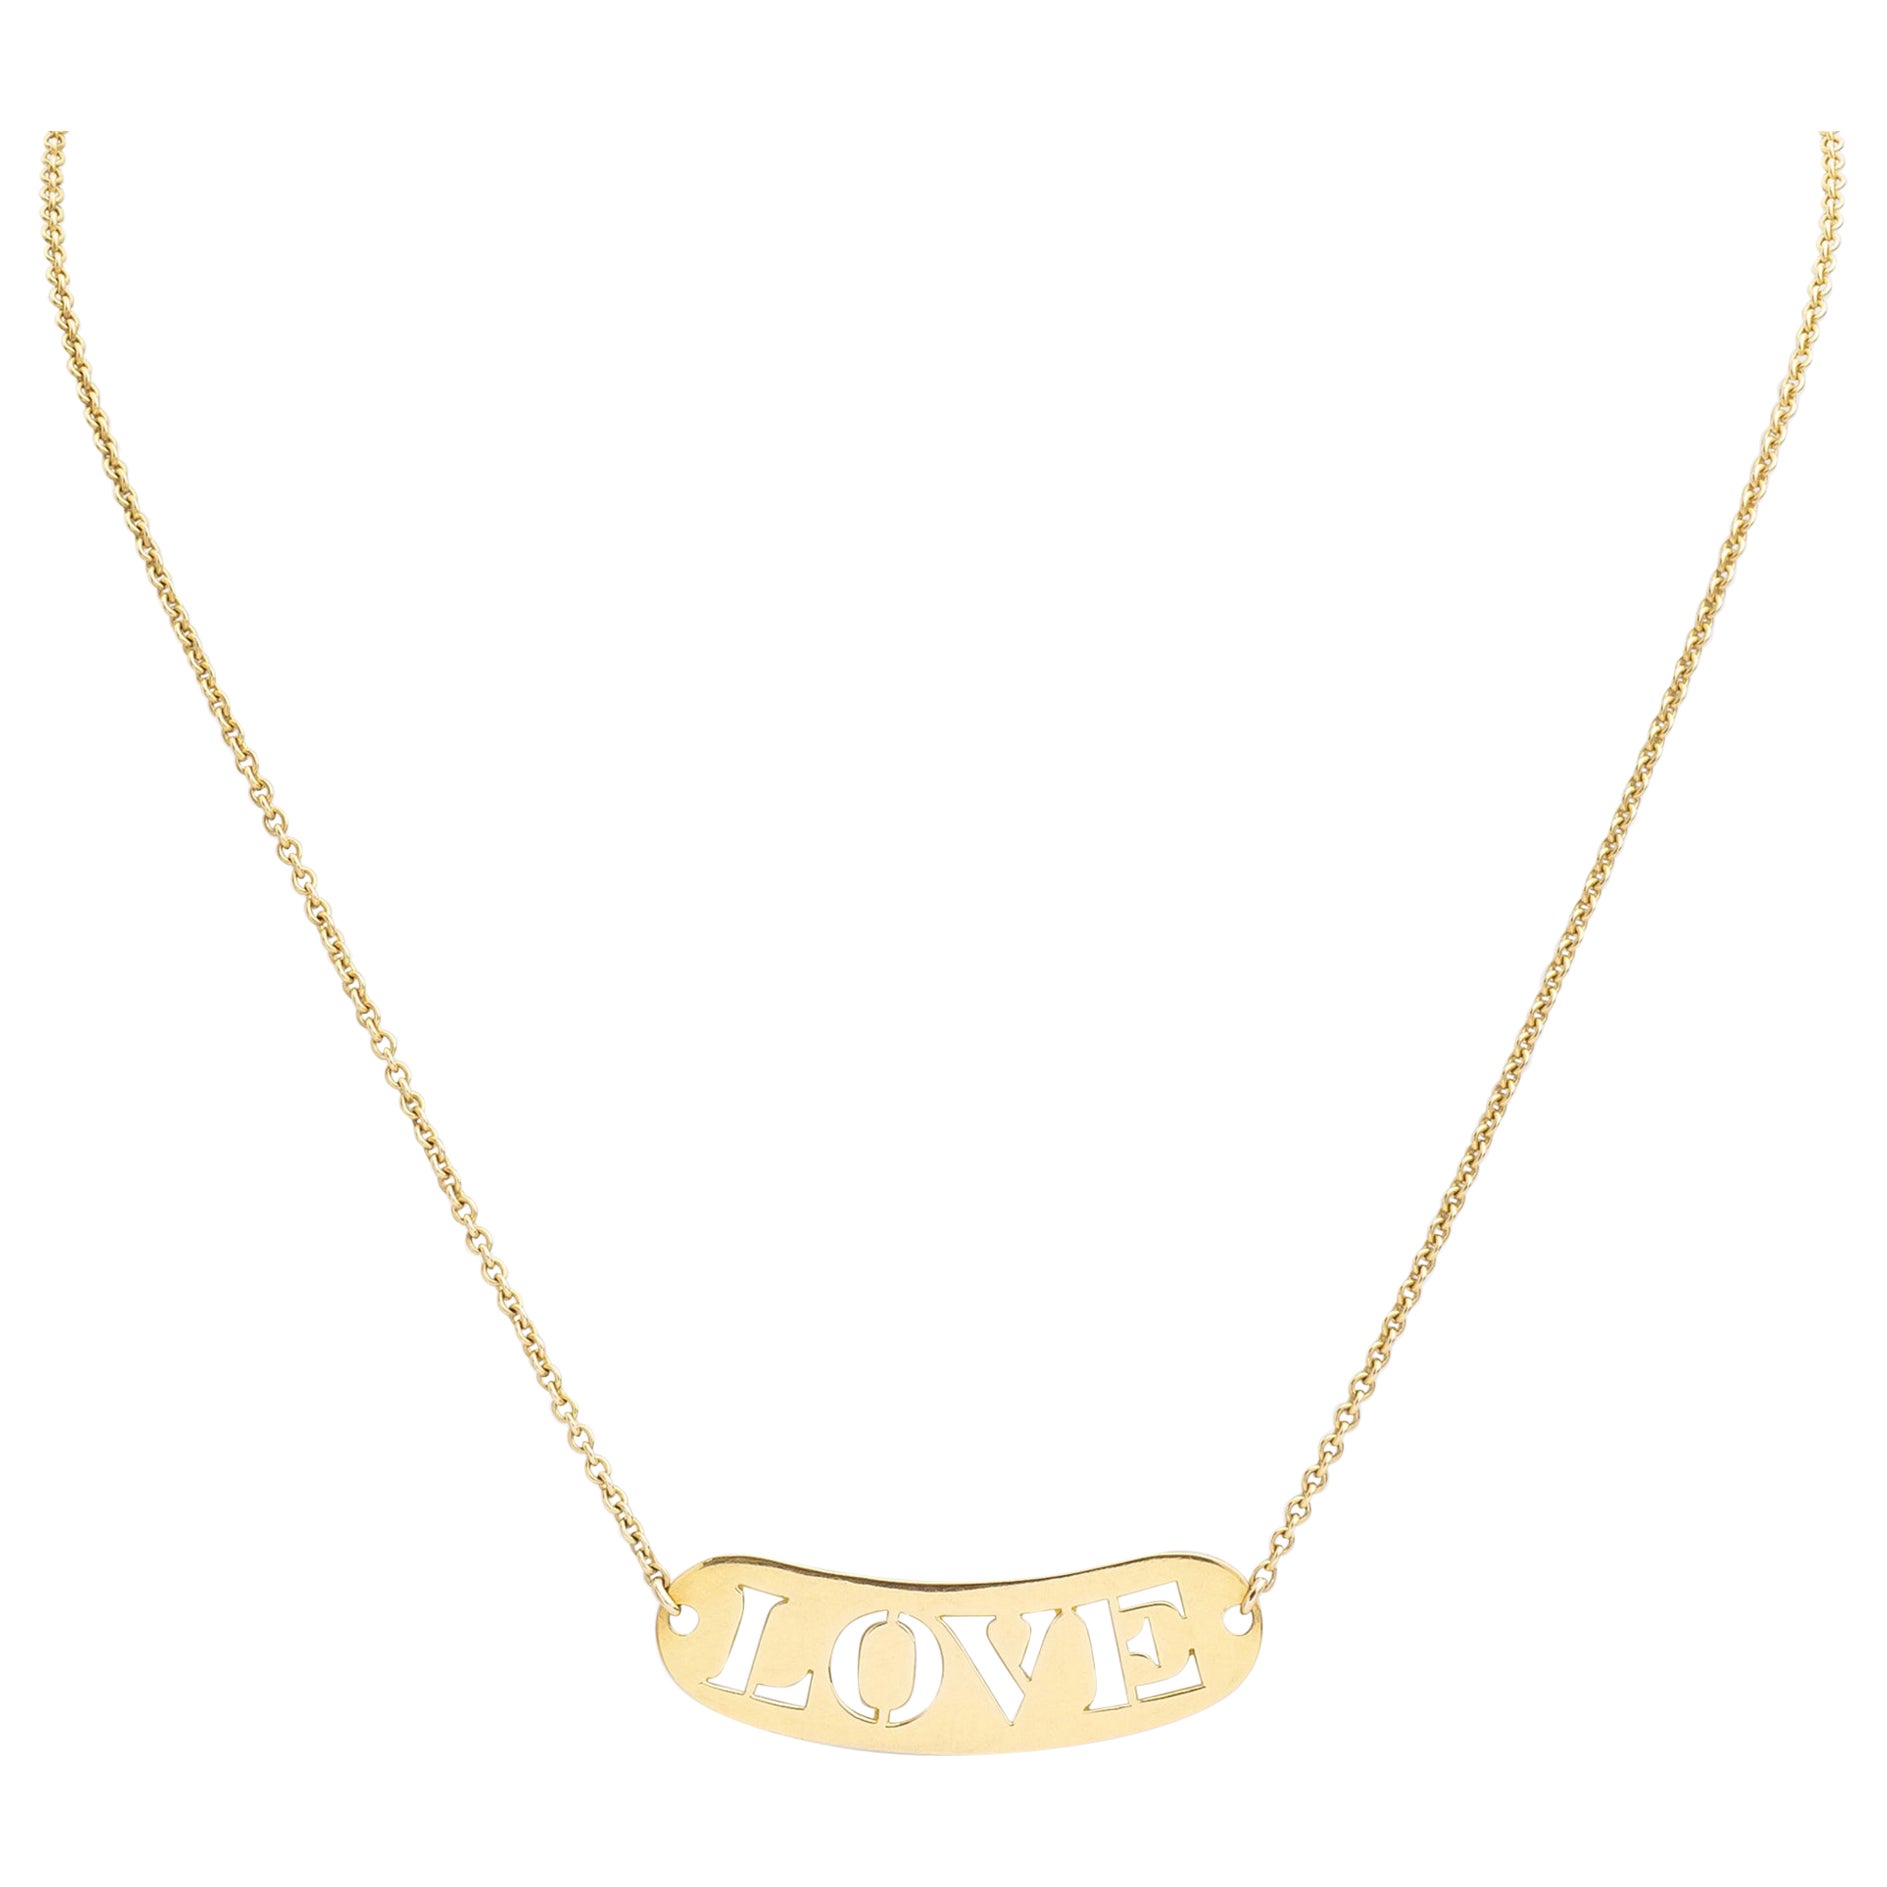 18 Karat Yellow Gold, French Made 'Love' Necklace